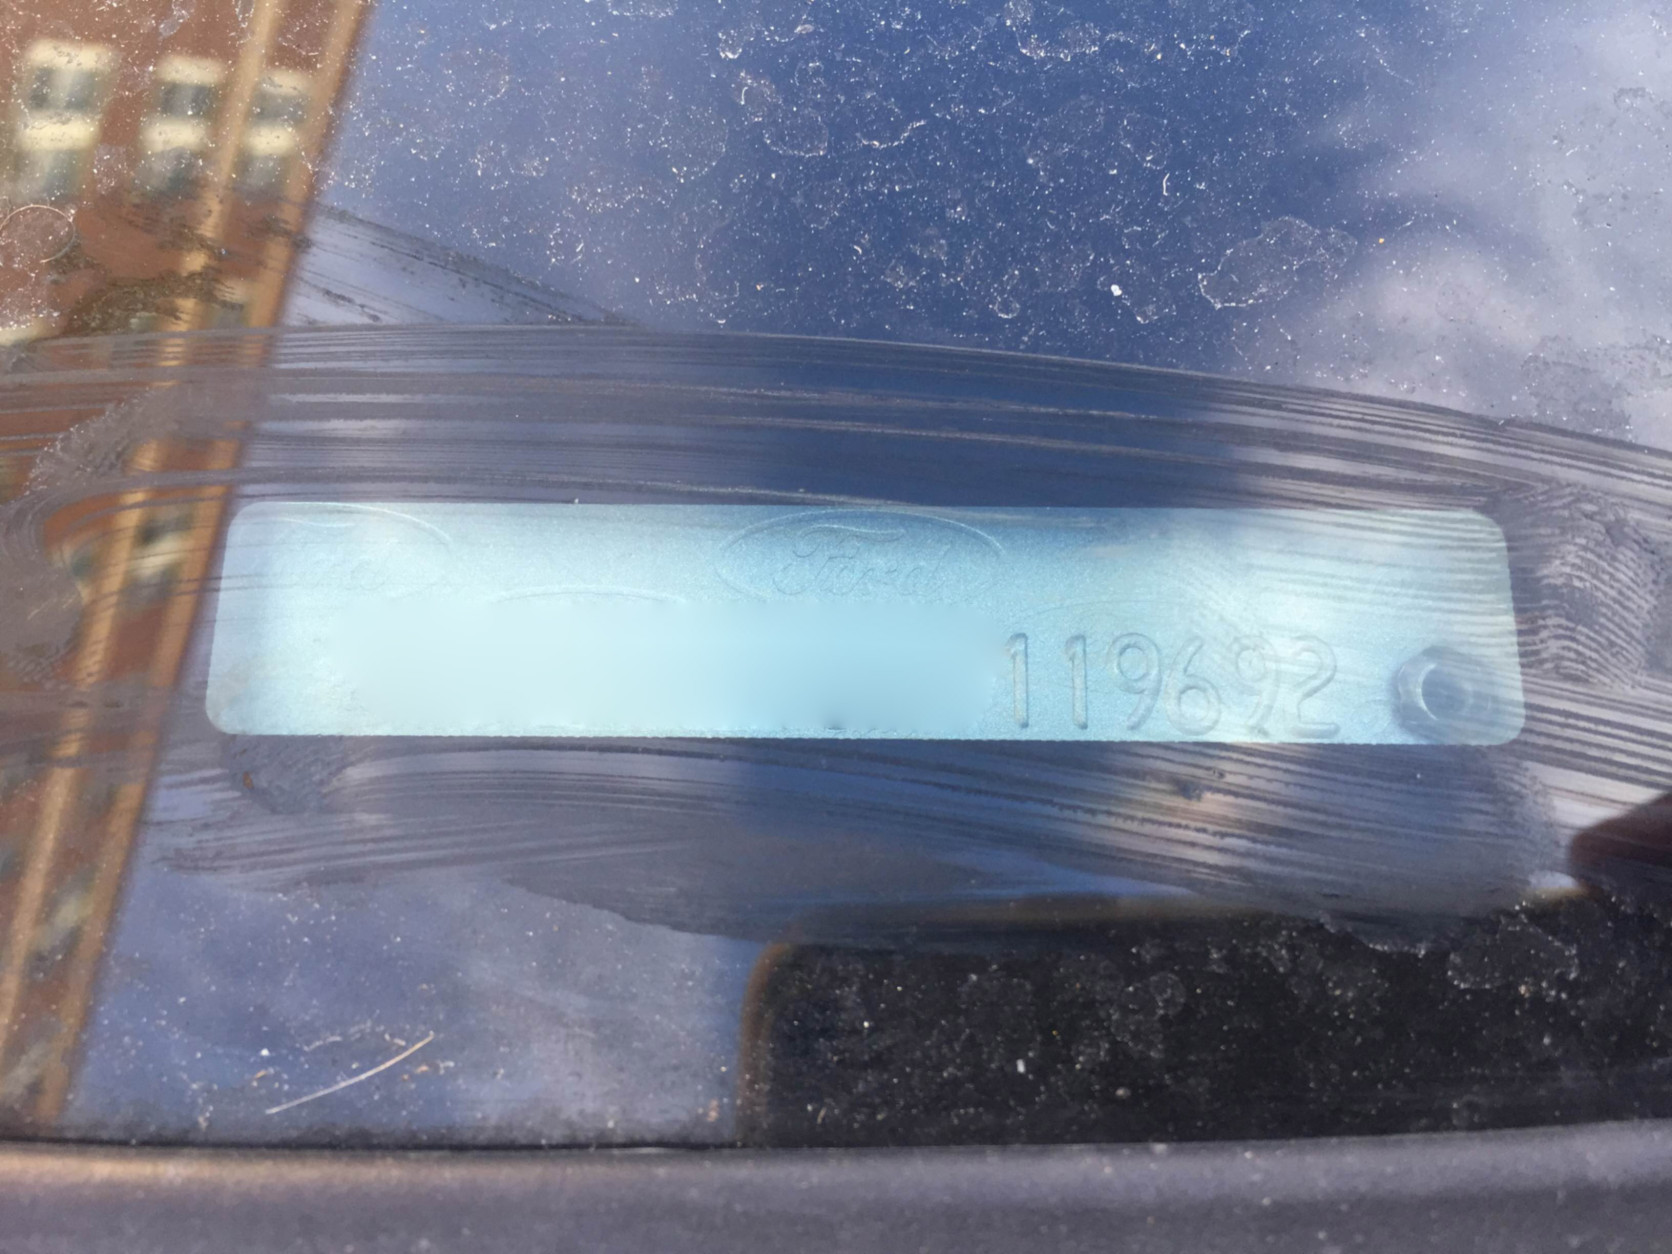 The tickets were issued because the license plate on the sticker is different than the actual plates, but as the photo reveal, the VIN numbers are identical. (WTOP/Ari Ashe)